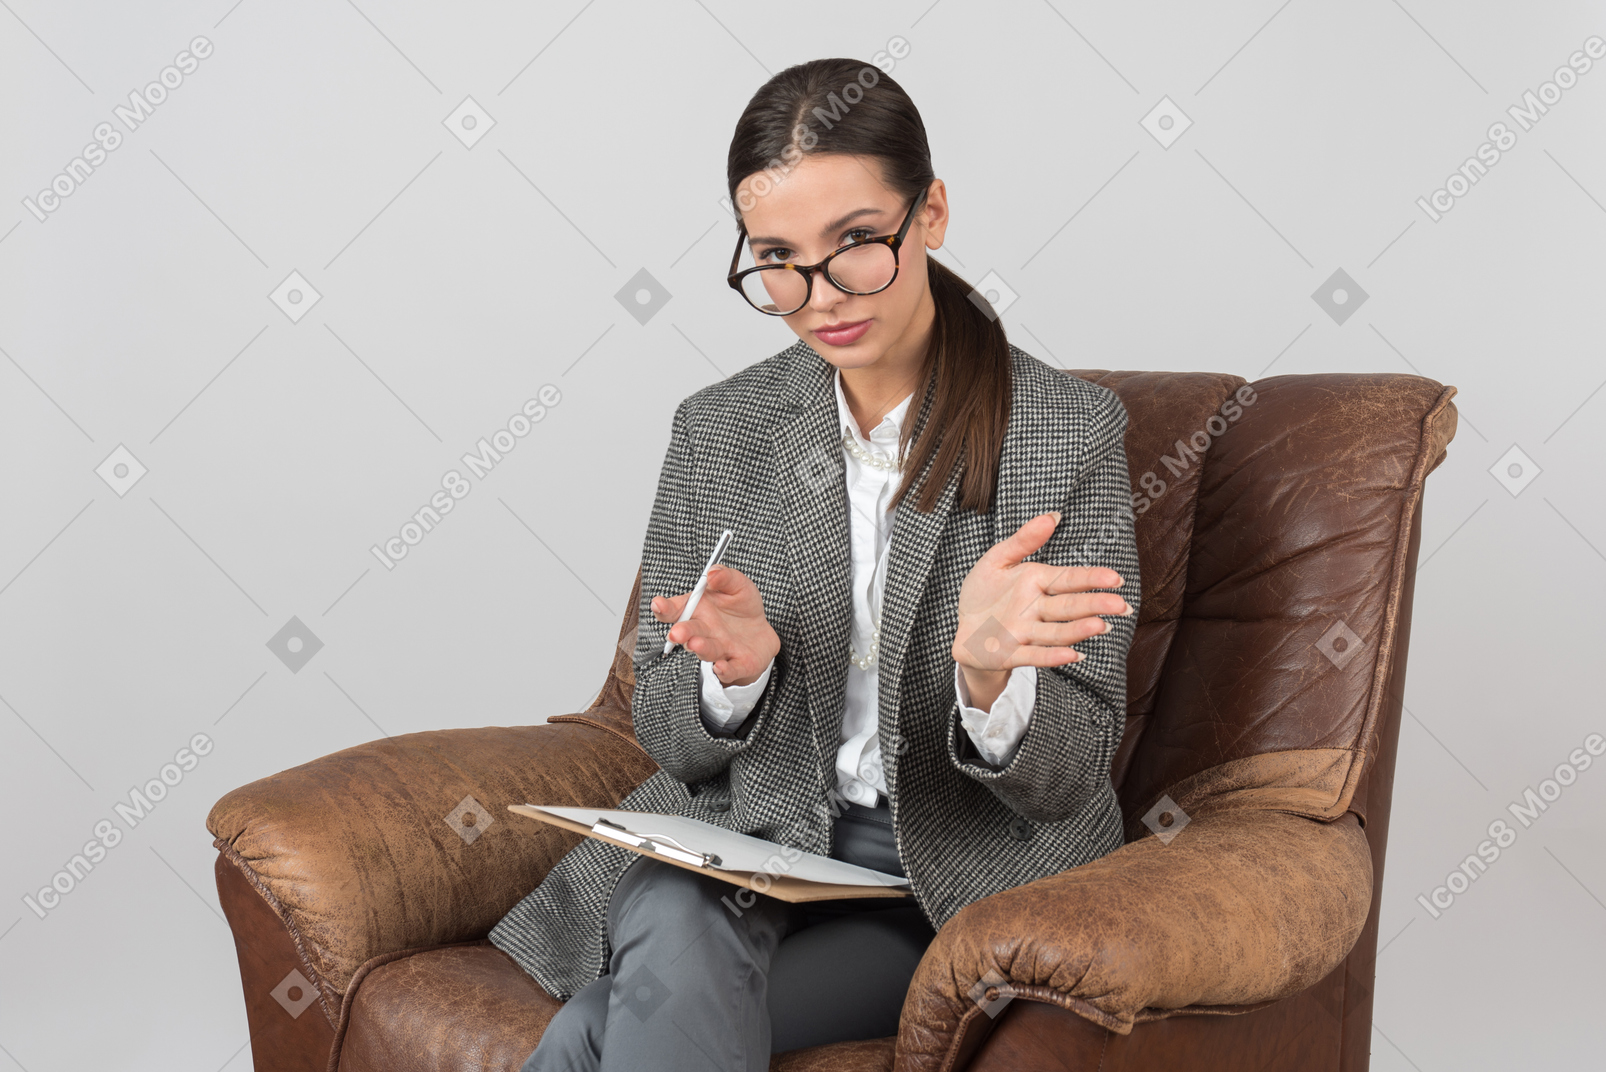 Involved in work young female psychologist sitting and showing something with her hands